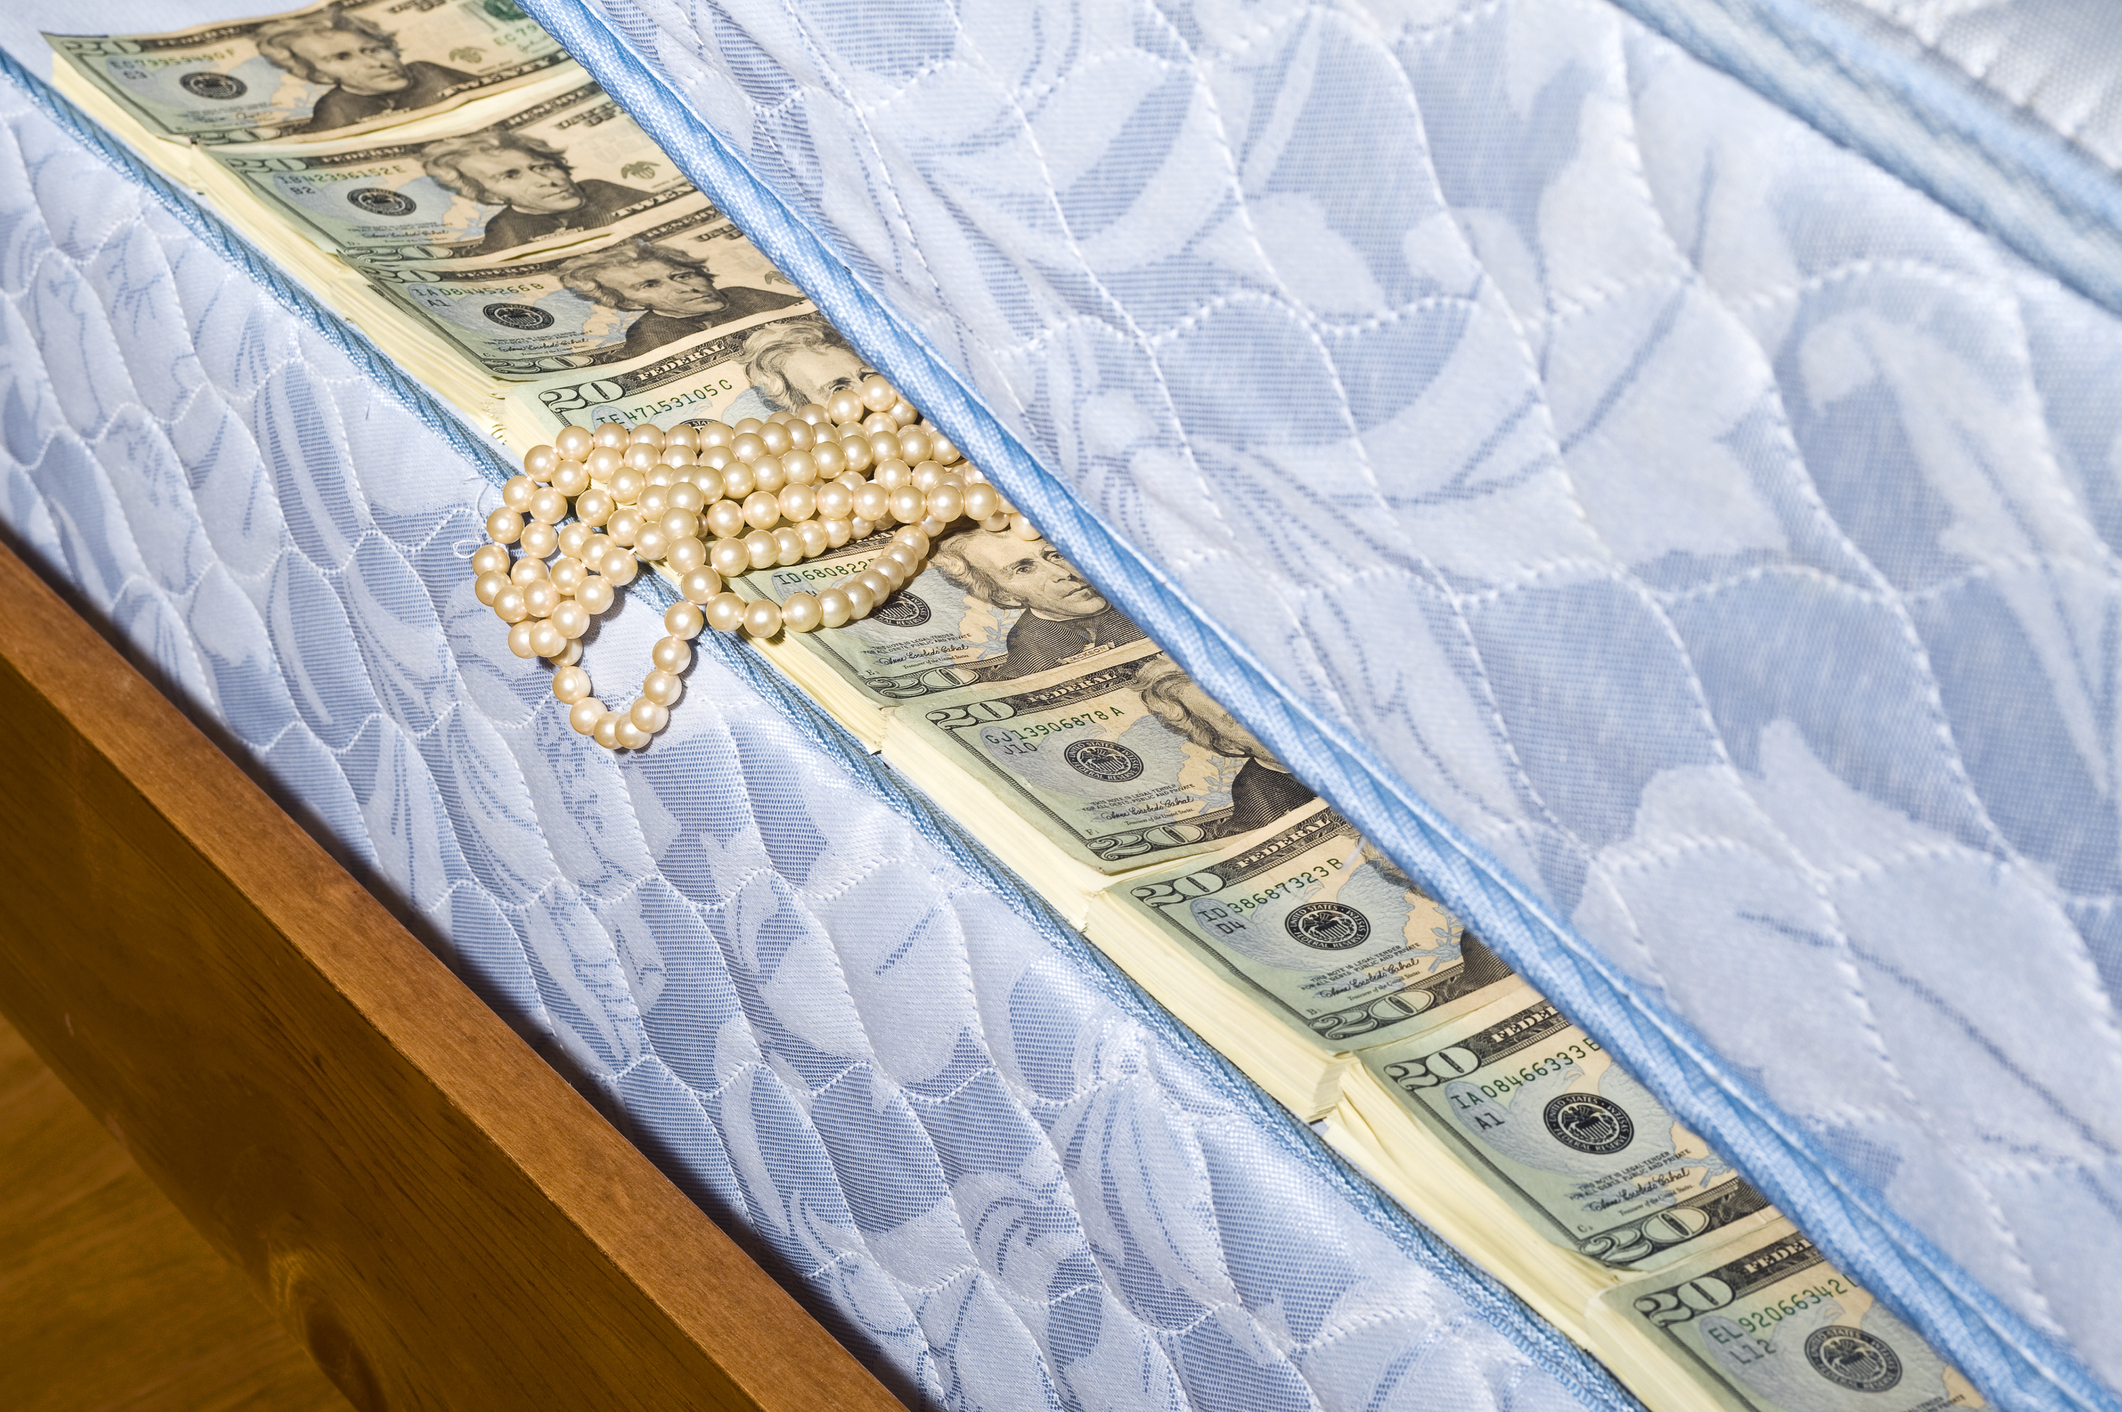 Pearl necklace on a mattress with money stuffed inside, implying hidden savings